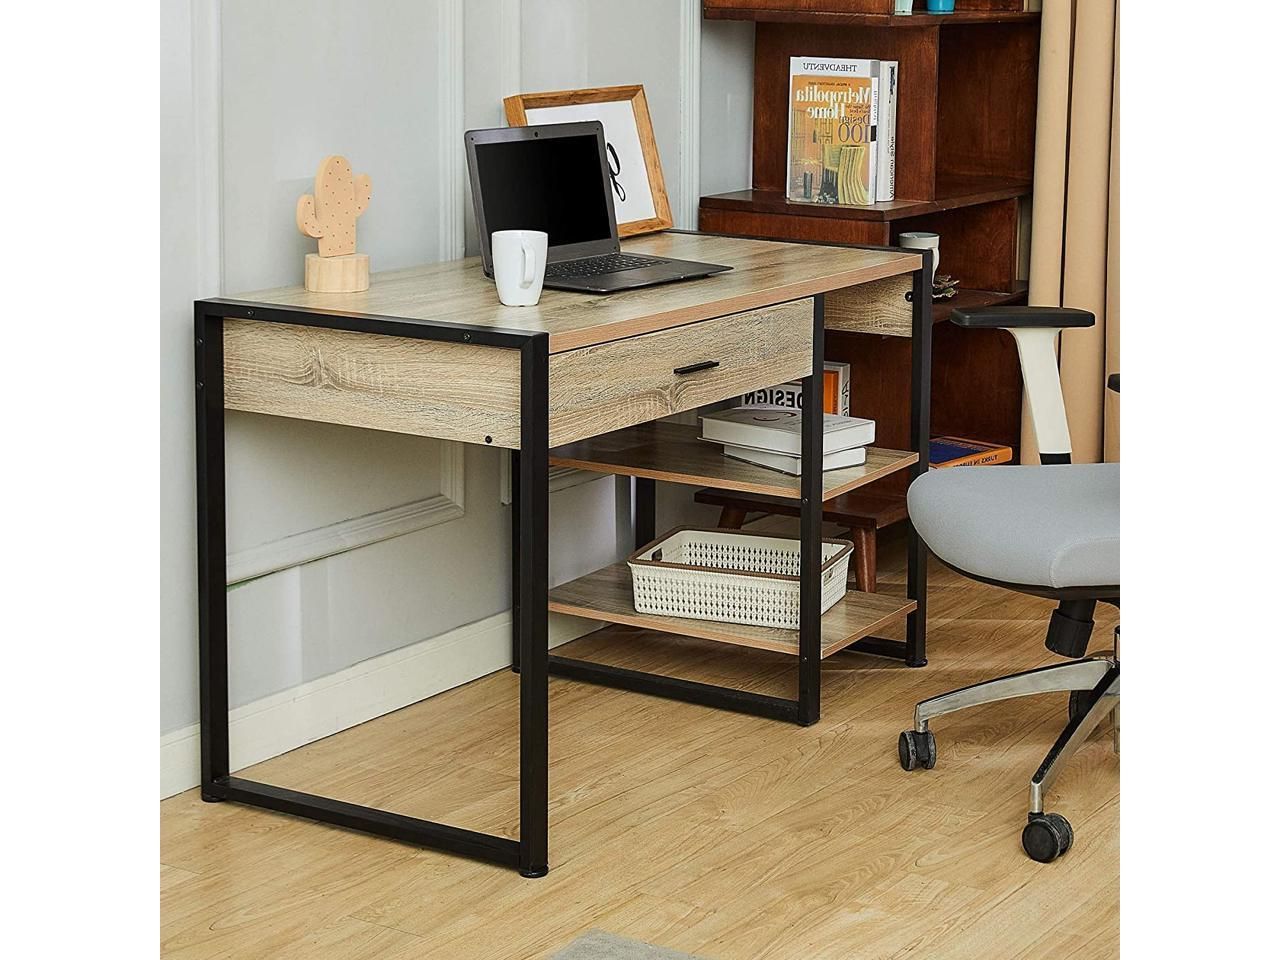 Most Popular Co Z 47" Industrial Computer Desk W Drawer, 3 Prong Outlet, 2 Usb Ports With Regard To Acacia Wood Writing Desks With Usb Ports (View 11 of 15)